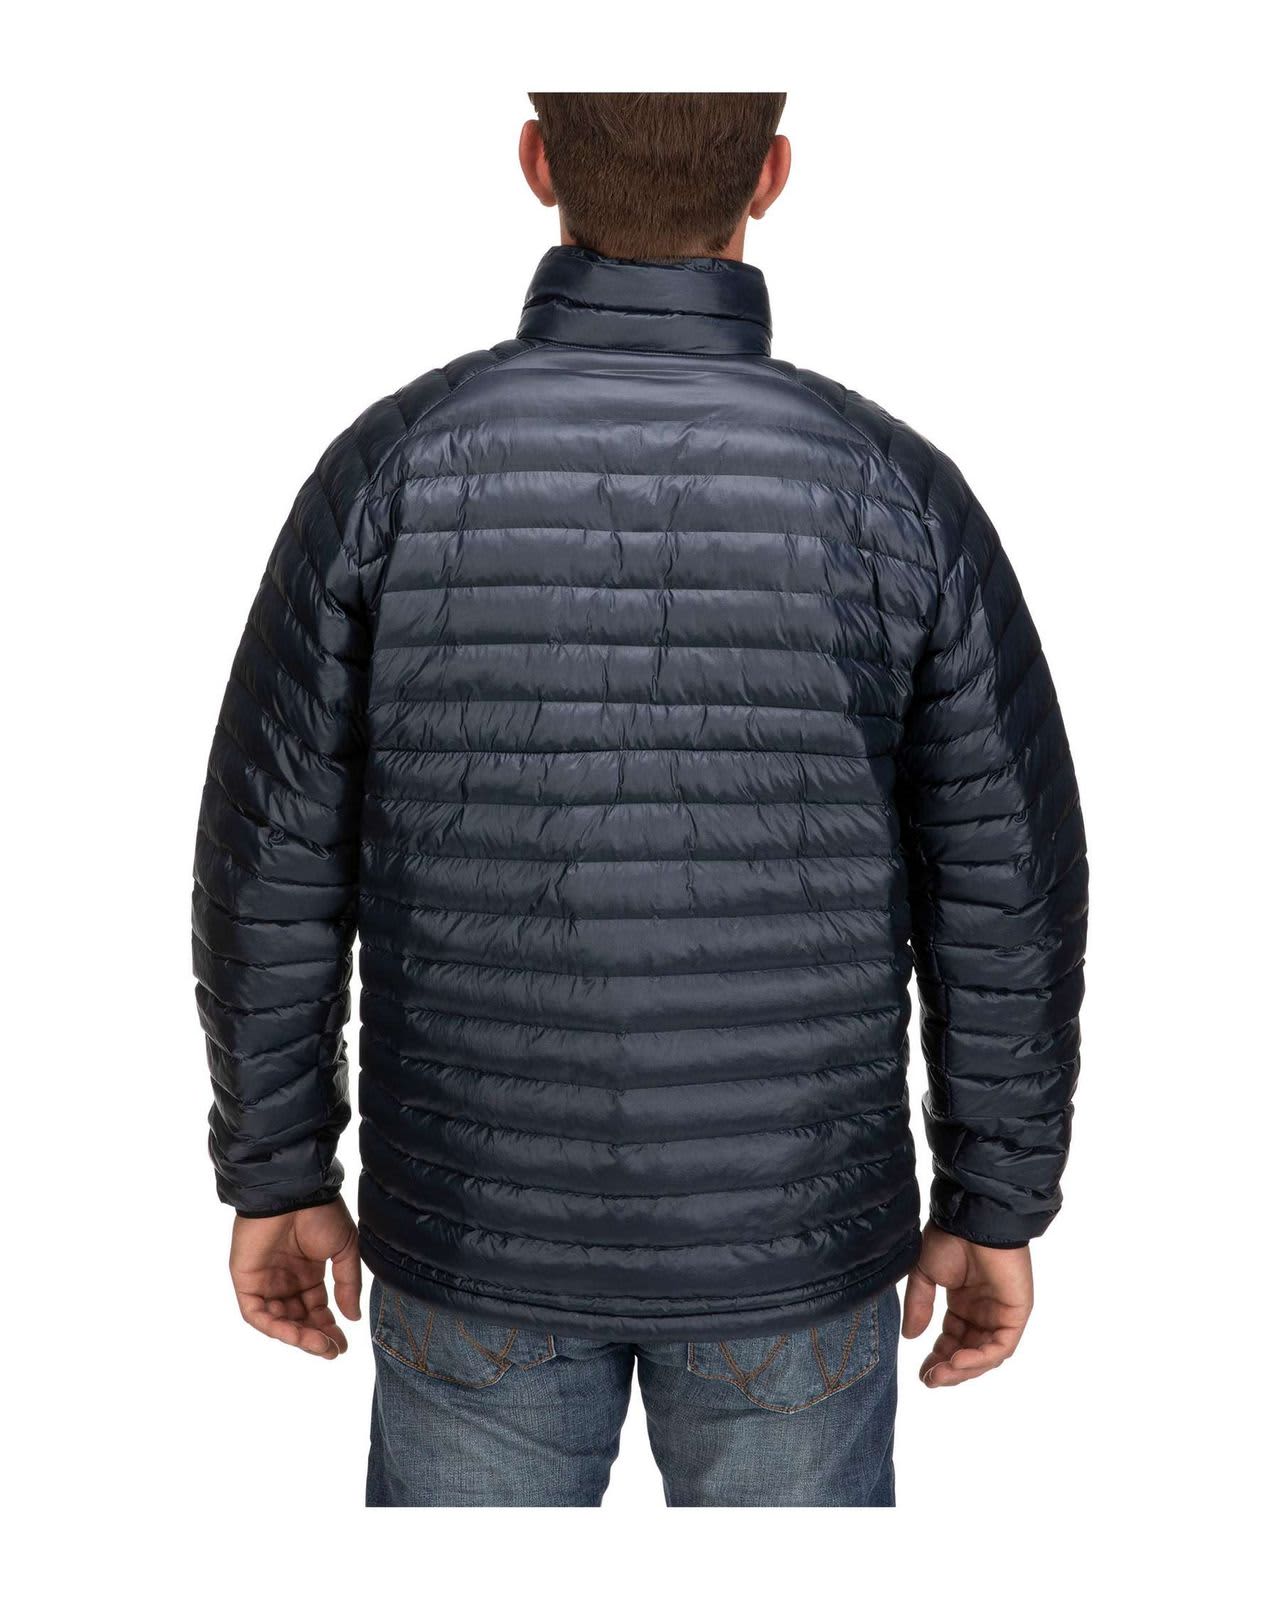 Simms ExStream Jacket with Primaloft Silver Insulation in Admiral Blue ...